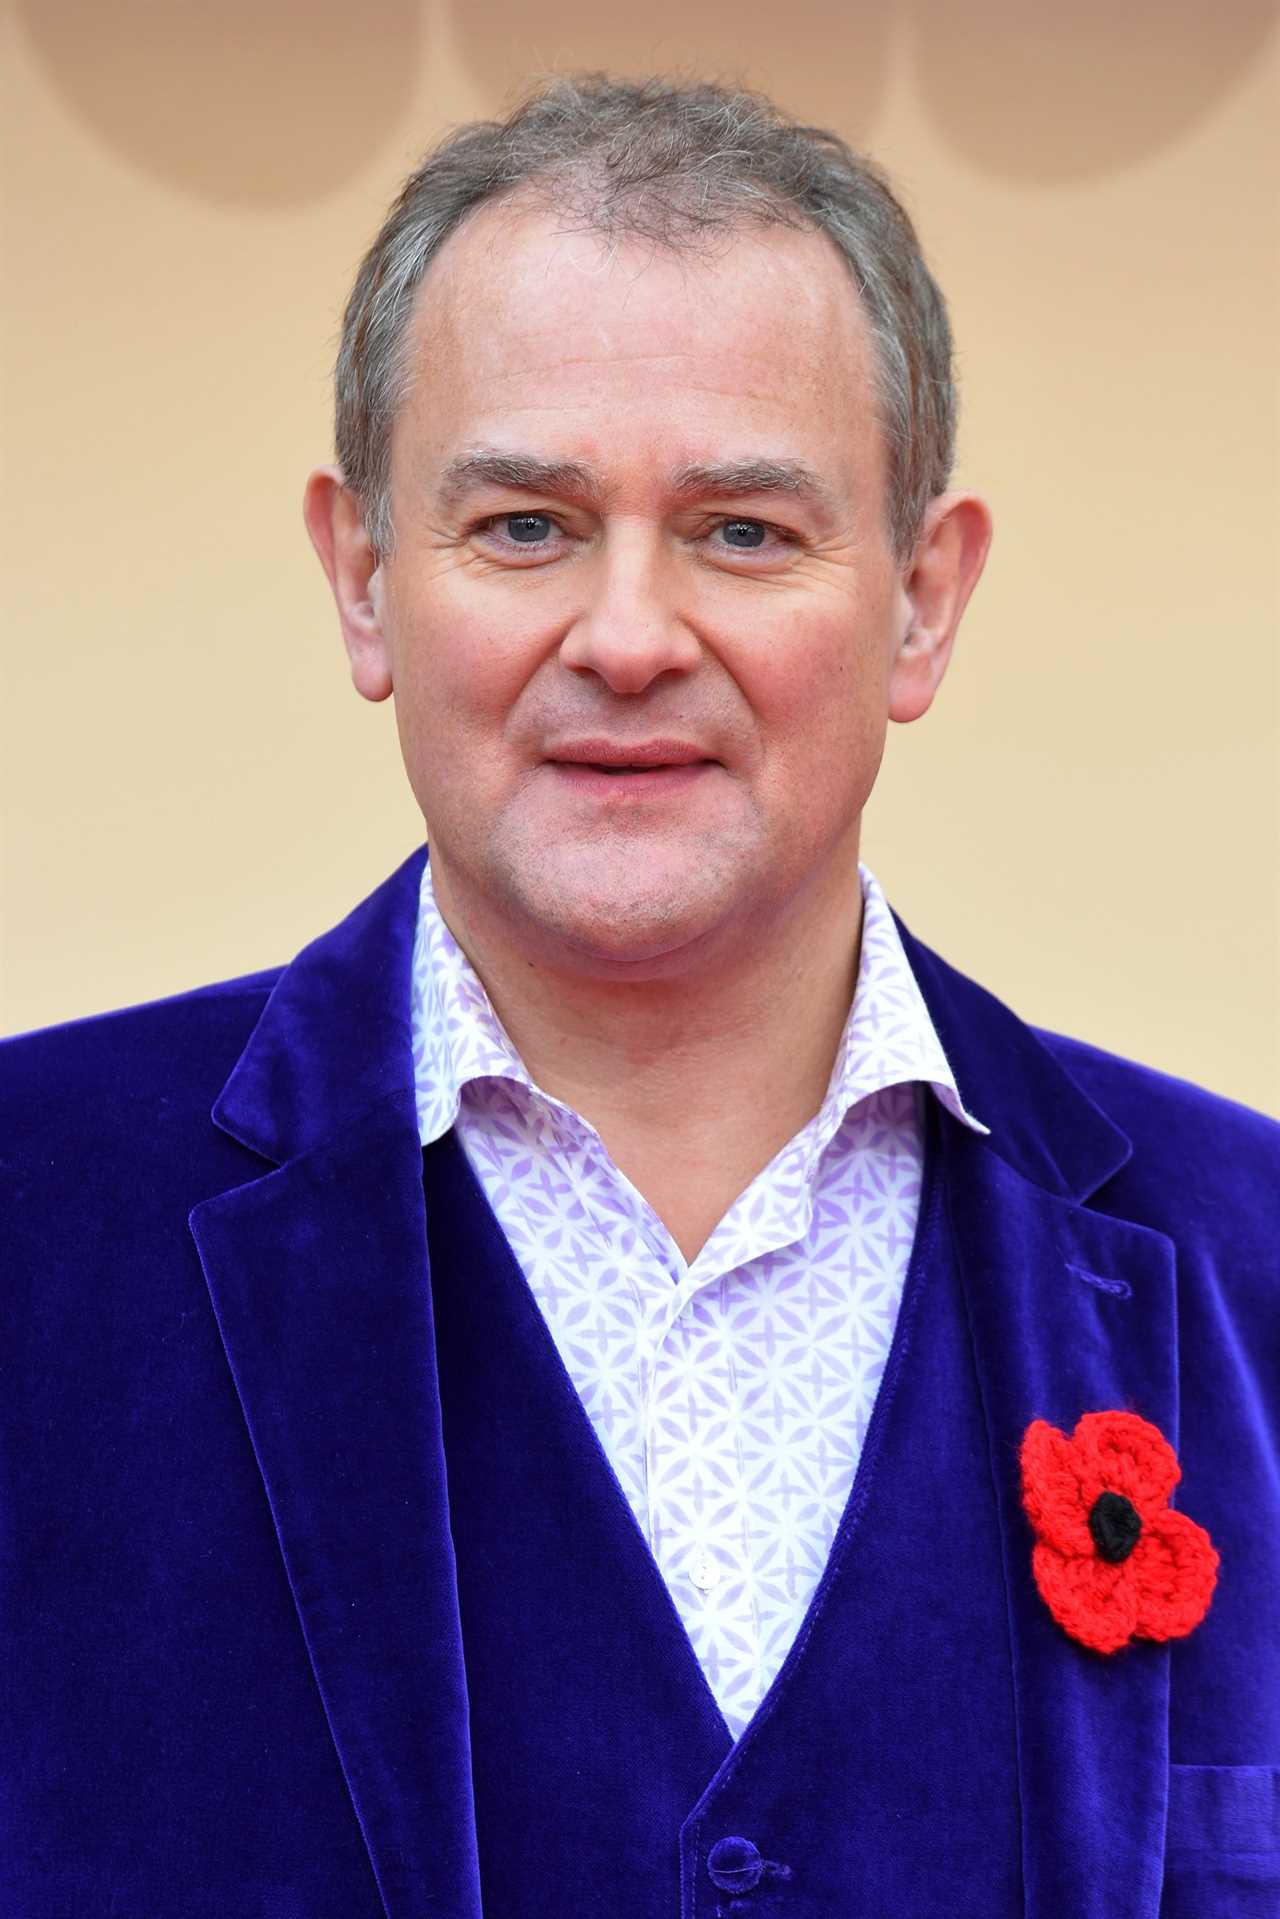 Who is Hugh Bonneville and is he married?